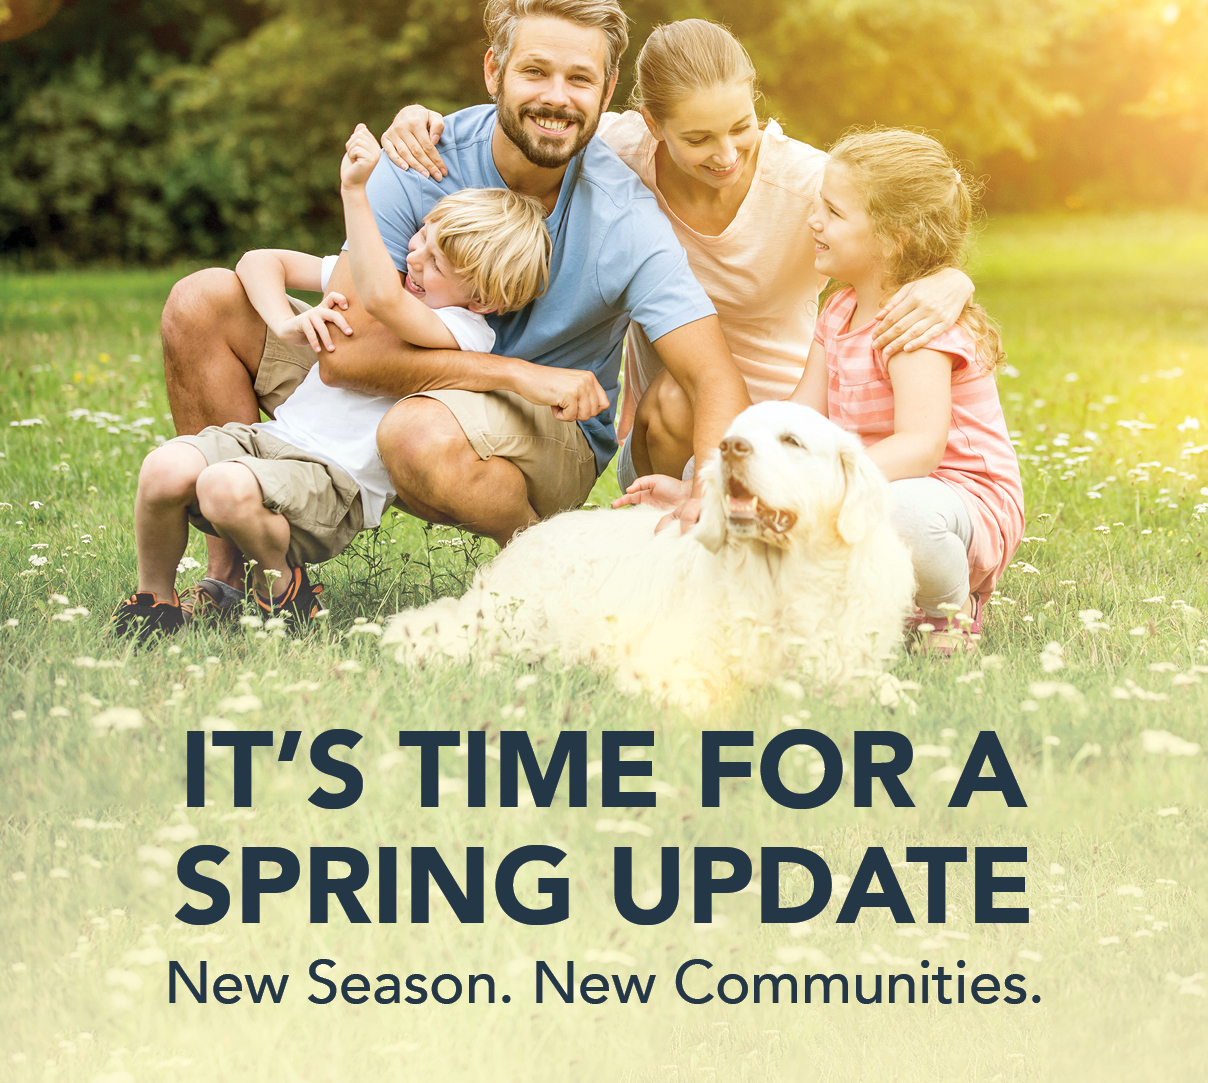 It's time for a Spring Update!